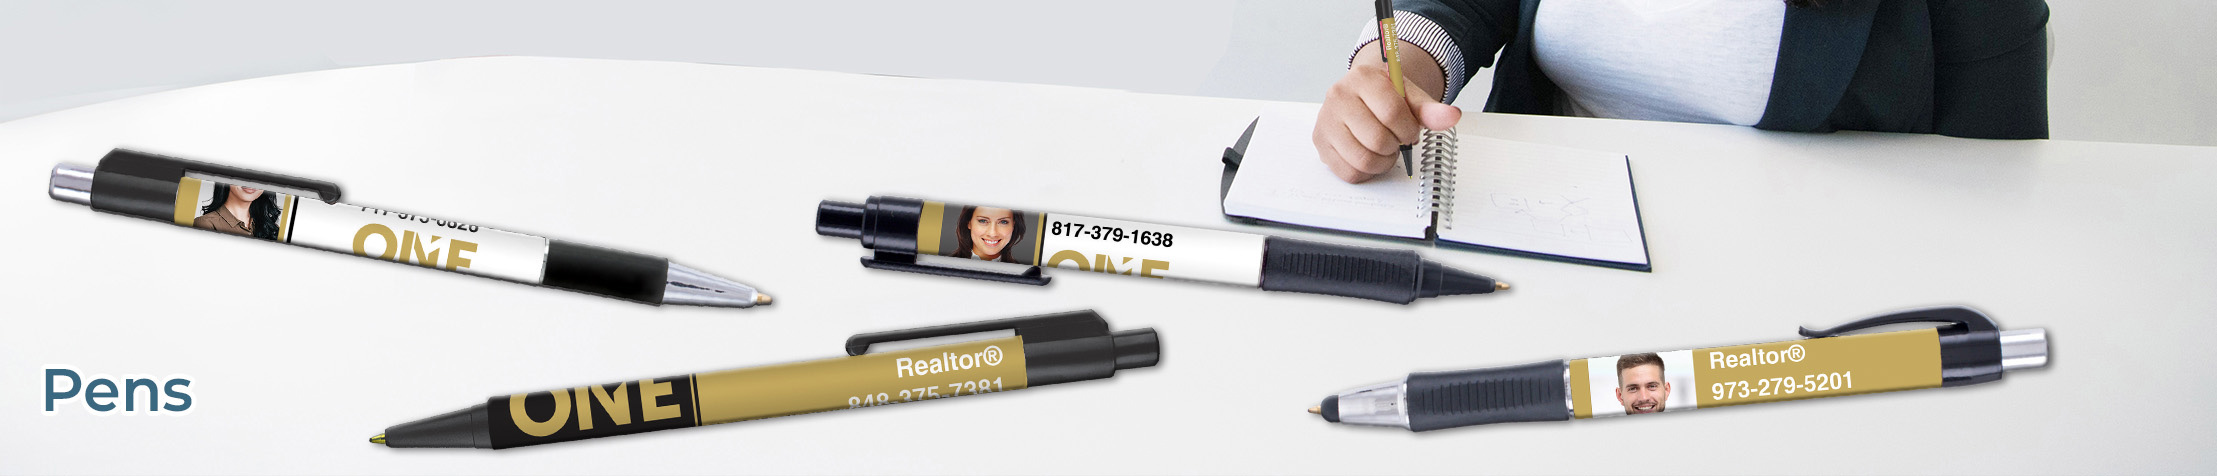 Realty One Group Real Estate Pens - Realty One Group  personalized realtor promotional products | BestPrintBuy.com